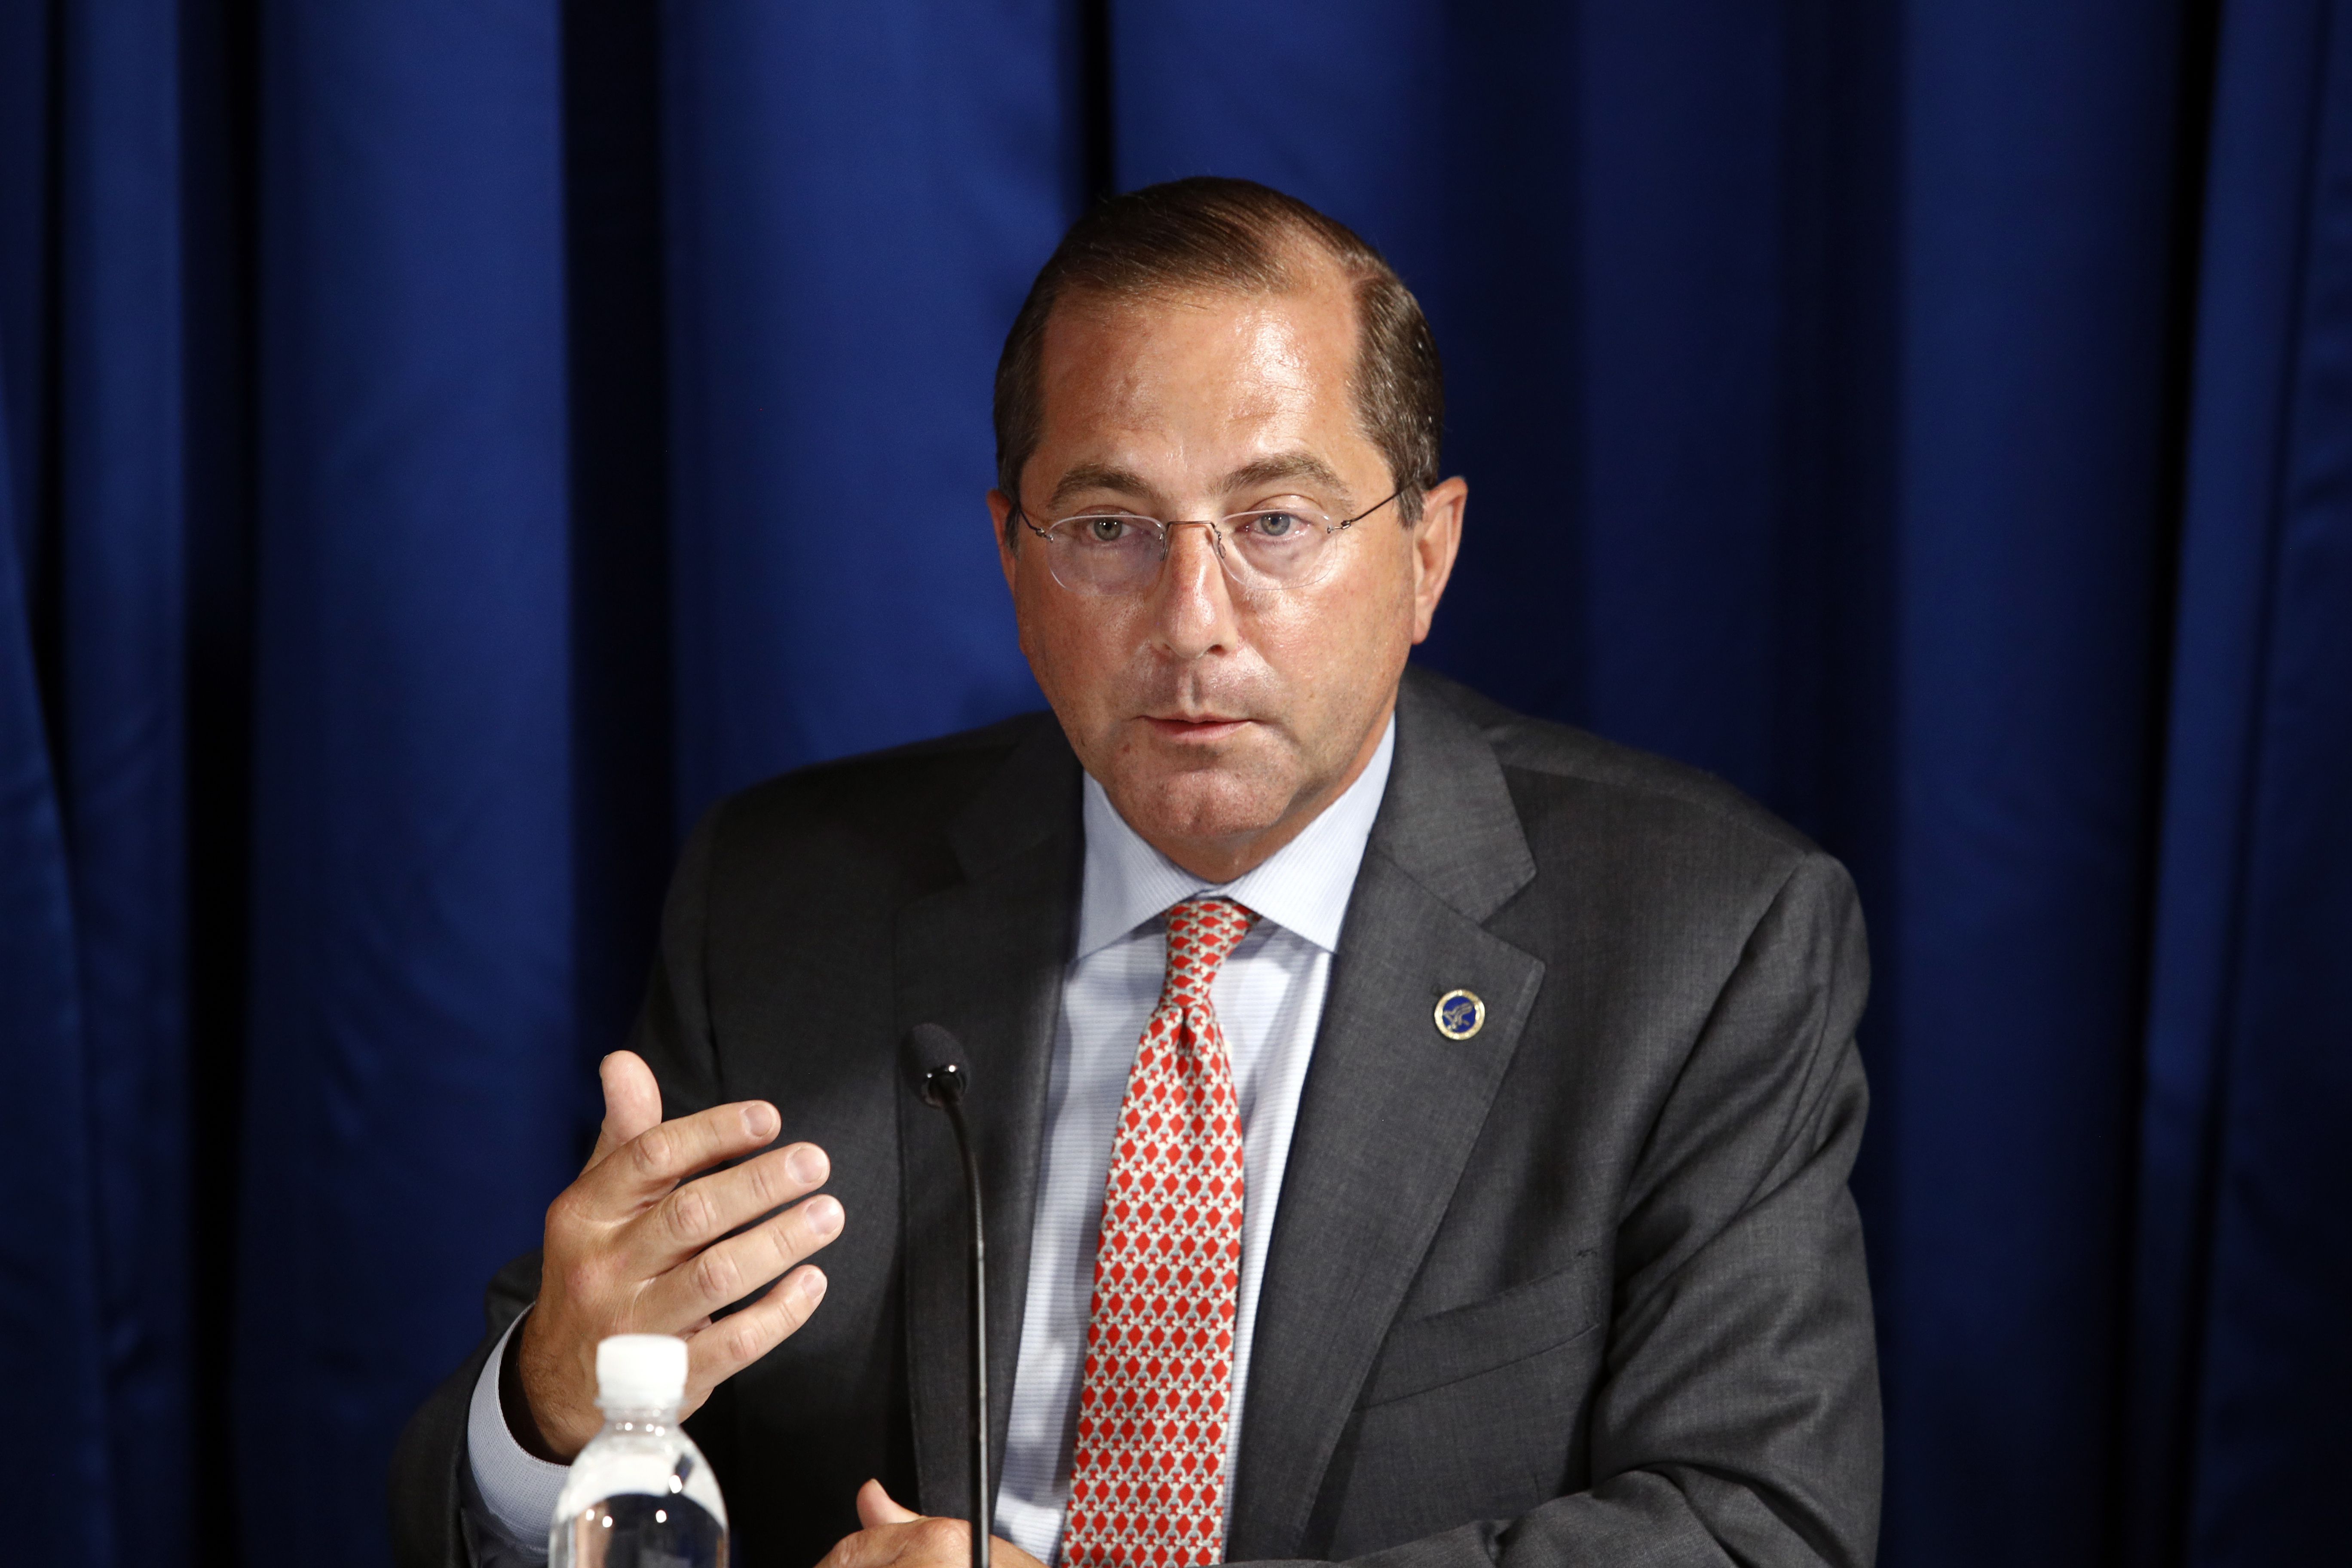 Health and Human Services Secretary Alex Azar speaks during a roundtable discussion with President Donald Trump on the coronavirus outbreak and storm preparedness at Pelican Golf Club in Belleair, Fla., Friday, July 31, 2020. (AP Photo/Patrick Semansky)